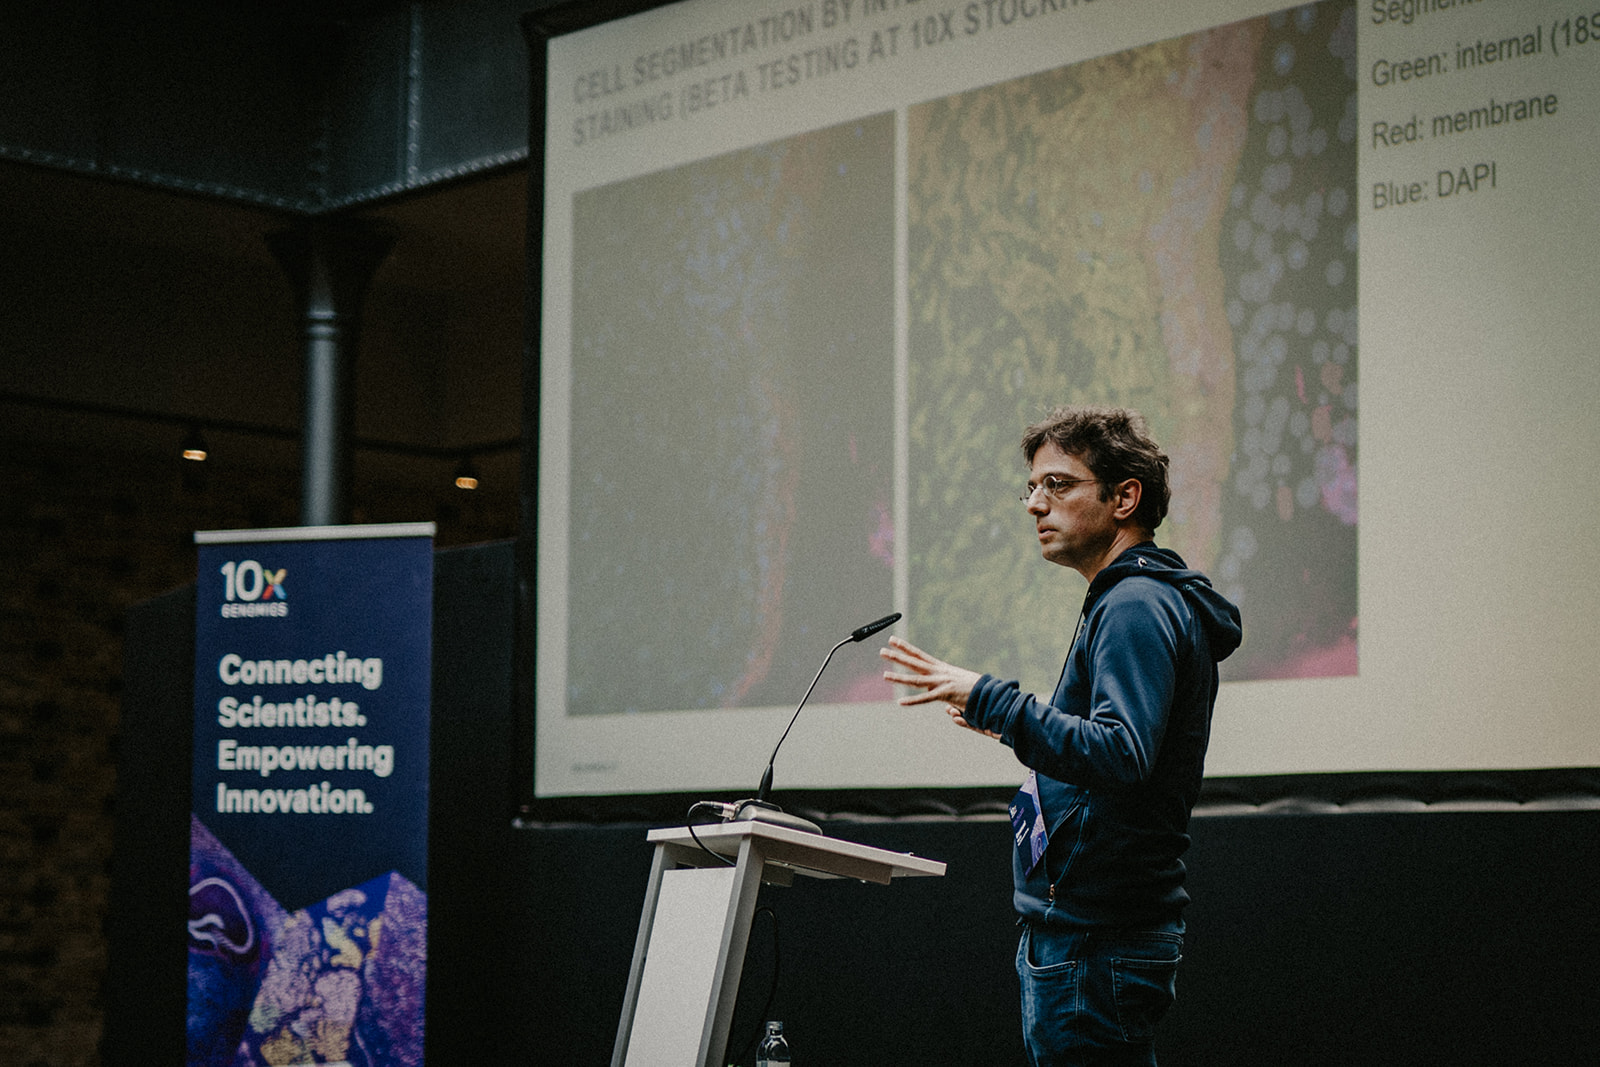 Emanuel Wyler, PhD, presenting at the 10x Genomics Single Cell & Spatial Discovery Symposium in Berlin.